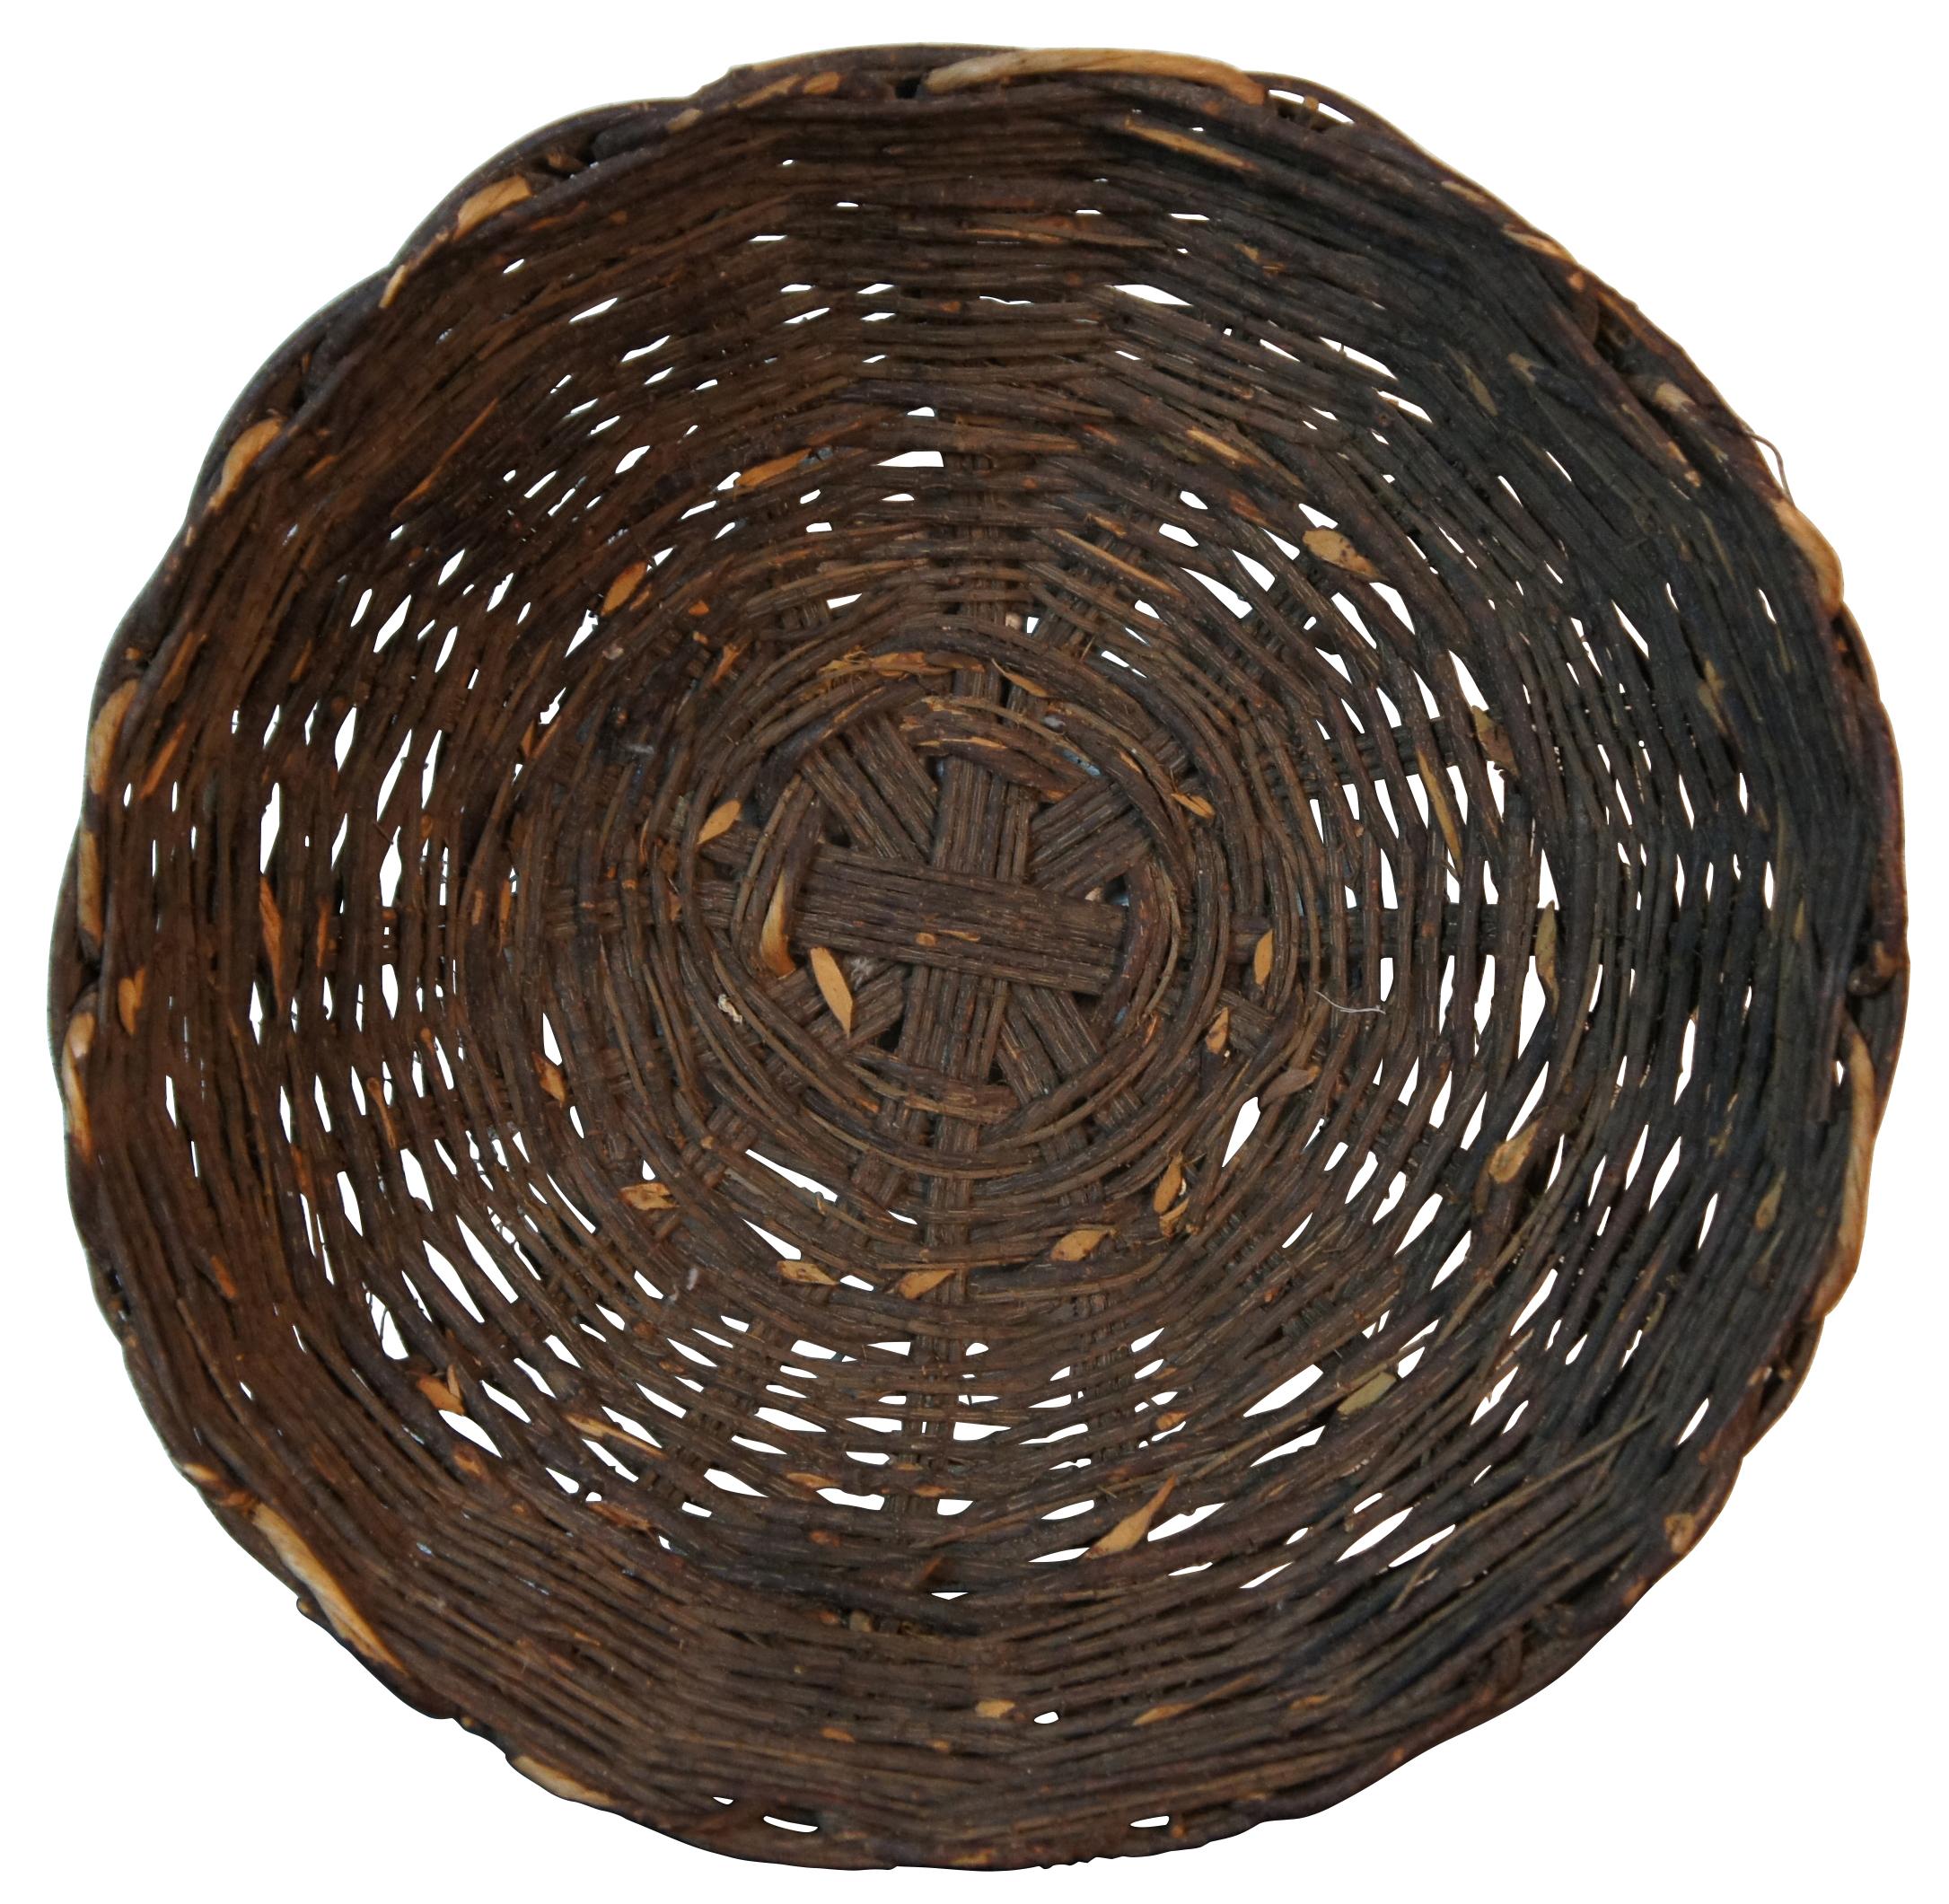 Antique hand woven willow basket with no handles and a gently scalloped top edge. Measure: 16